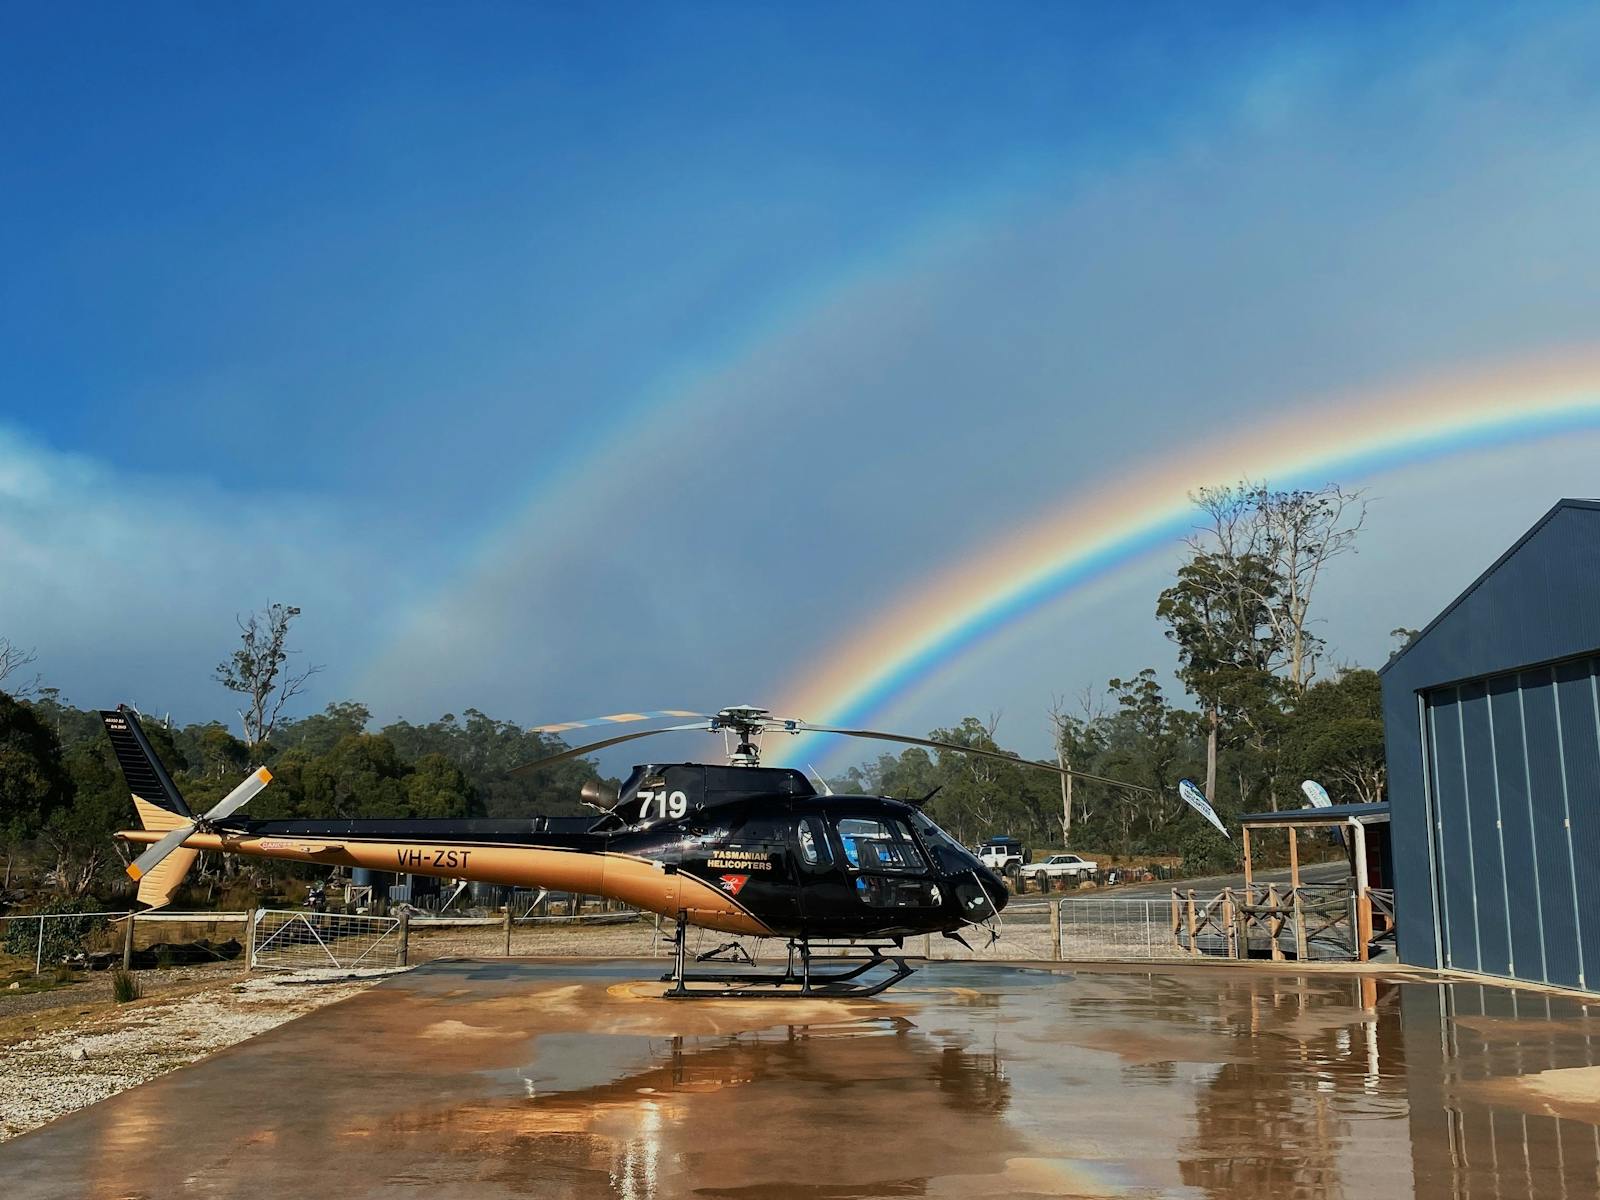 Our black & gold B2 Squirrel Helicopter on our concrete helipad, with a rainbow in the background